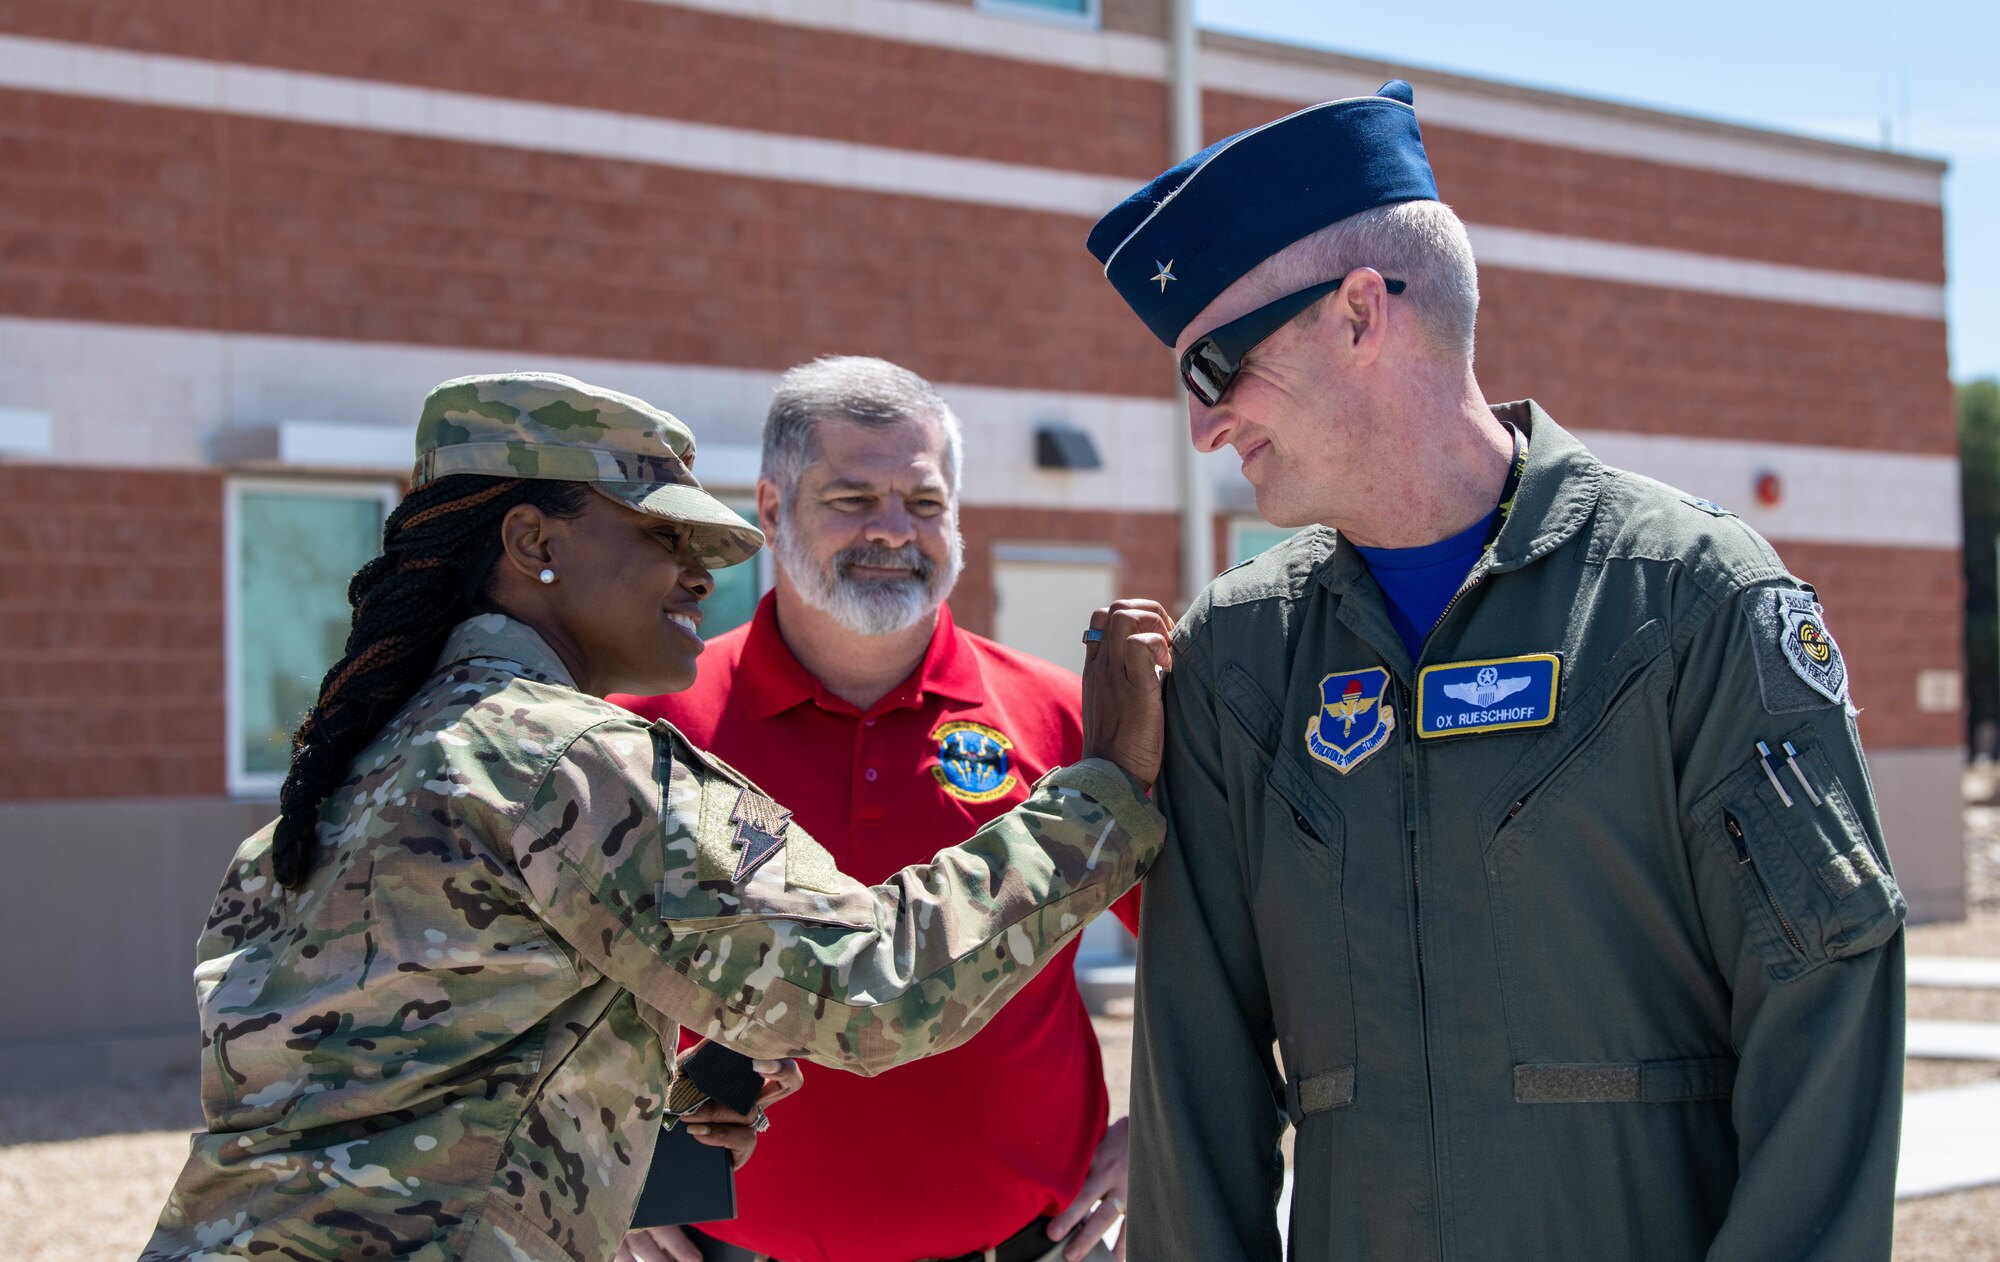 U.S. Air Force Maj. Ashley Lopez-Clark, 56th Communications Squadron commander, places a squadron patch on Brig. Gen. Jason Rueschhoff, 56th Fighter Wing commander, March 31, 2023, at Luke Air Force Base, Arizona.